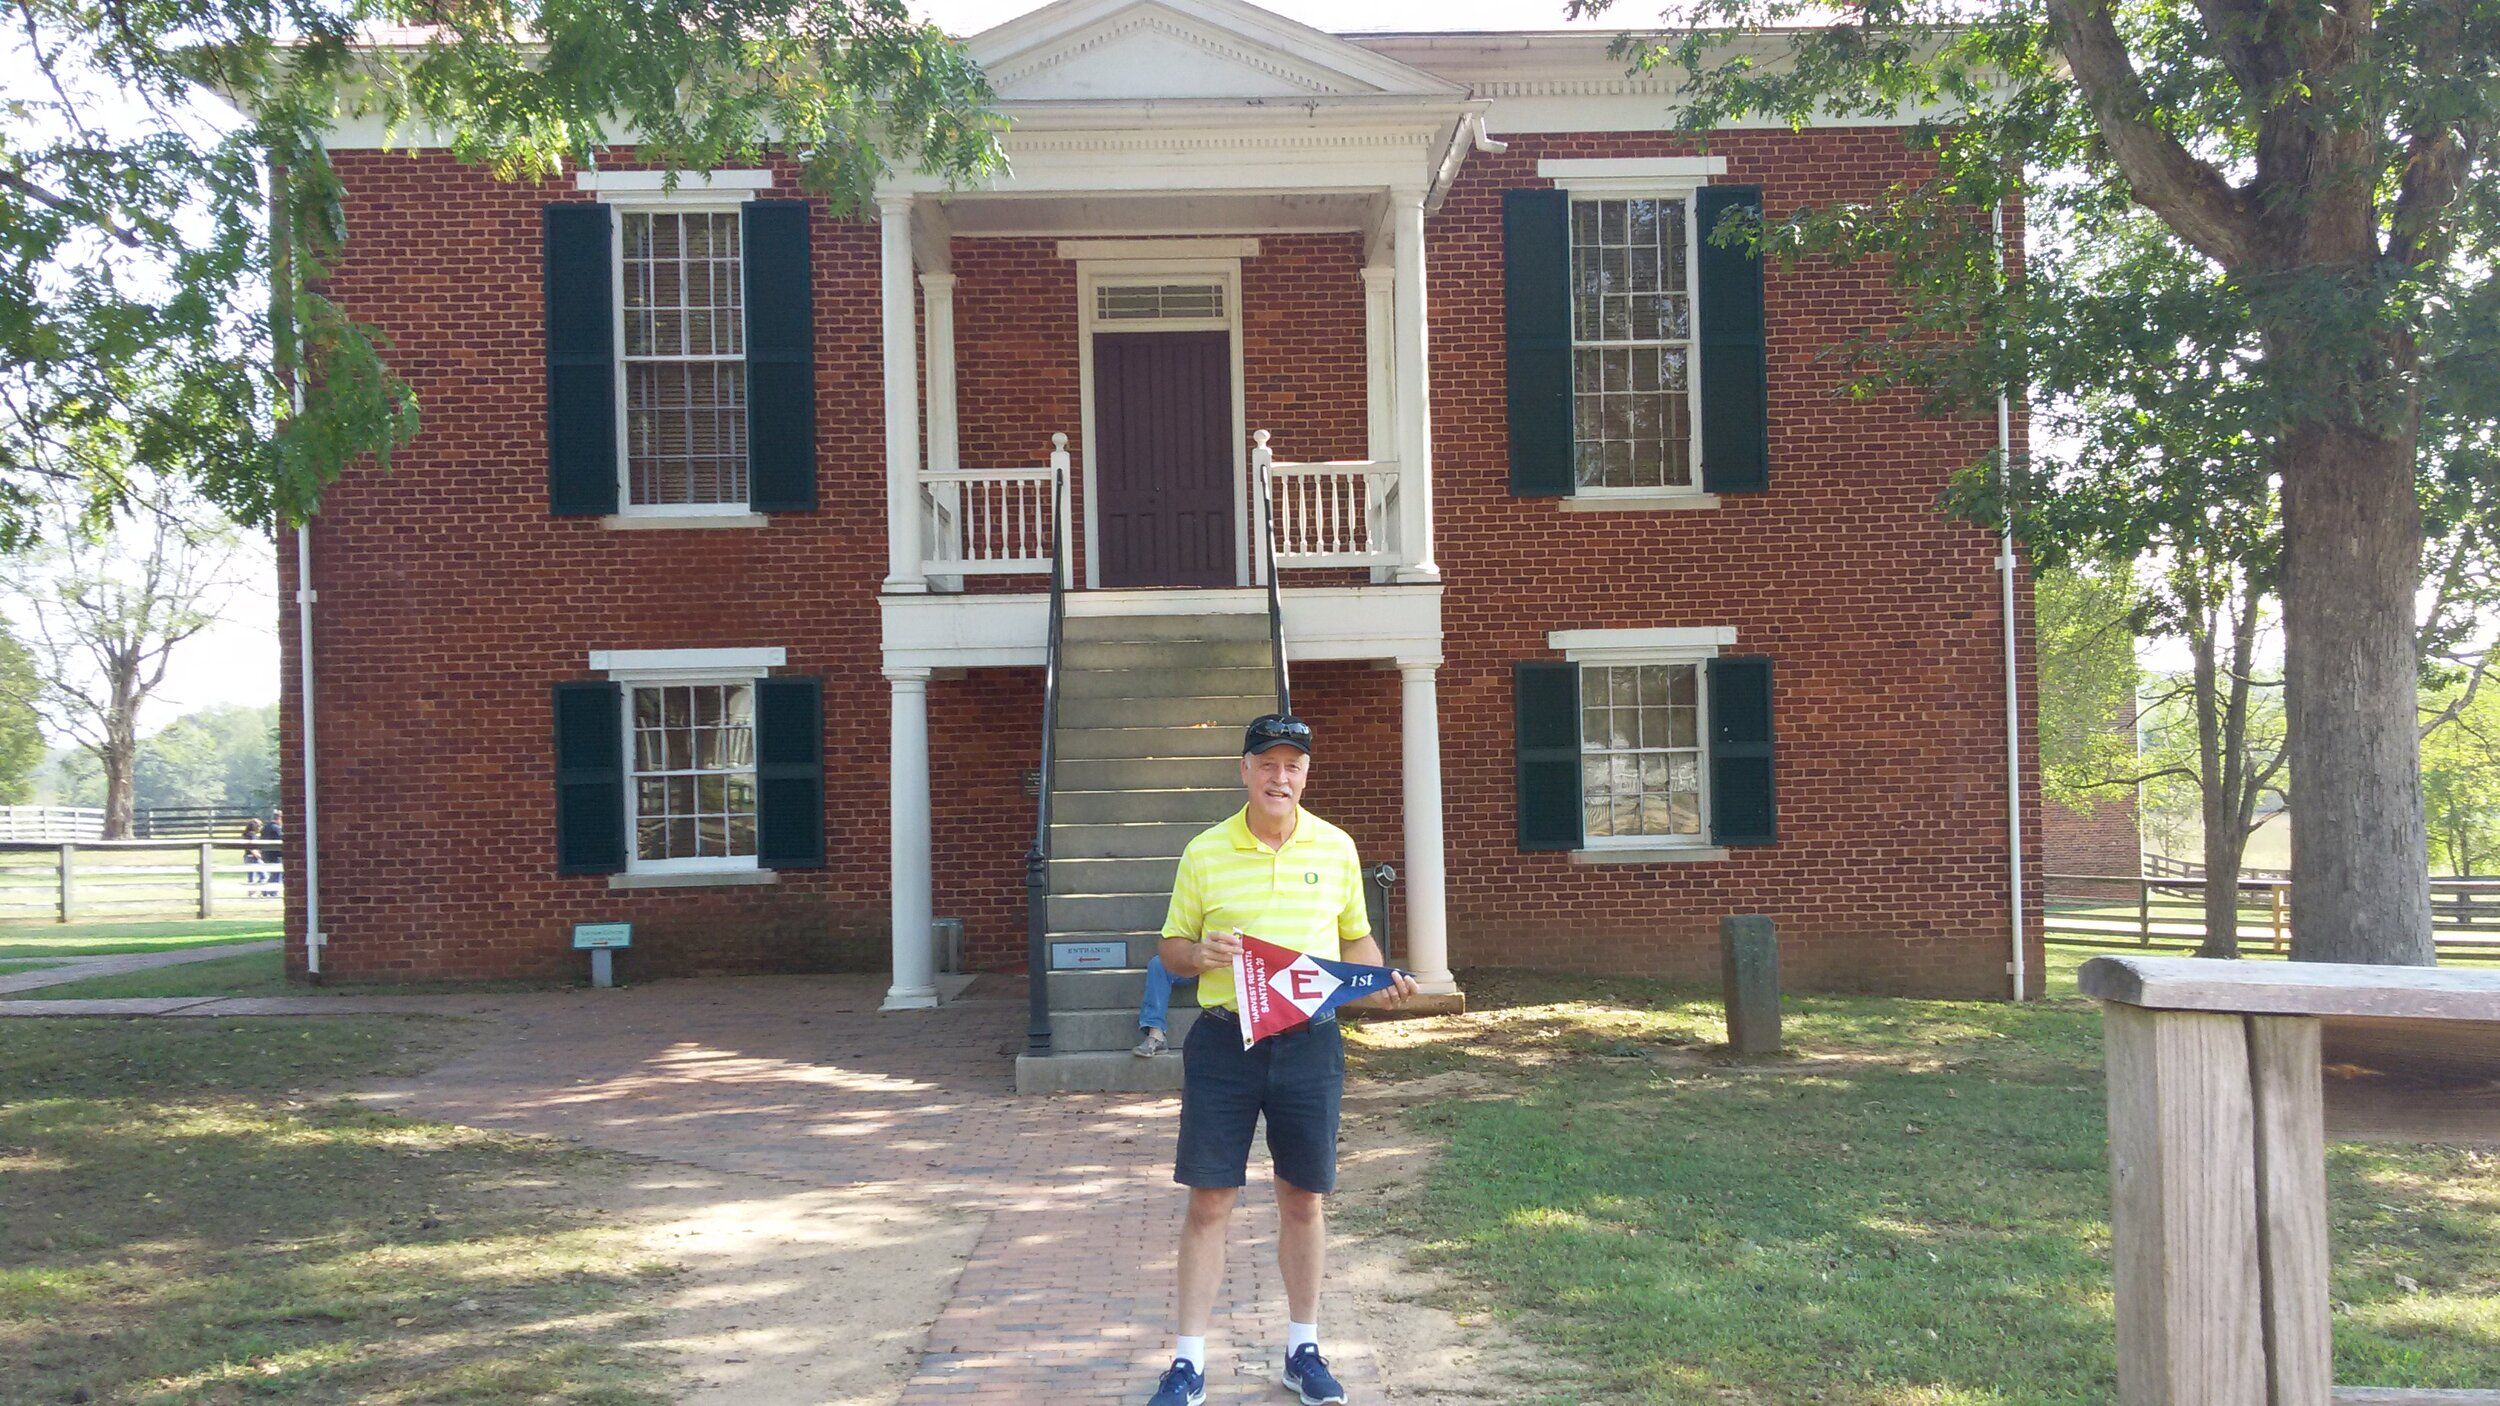  Paul shows his pride in front of the Appomattox Courthouse in Virginia 